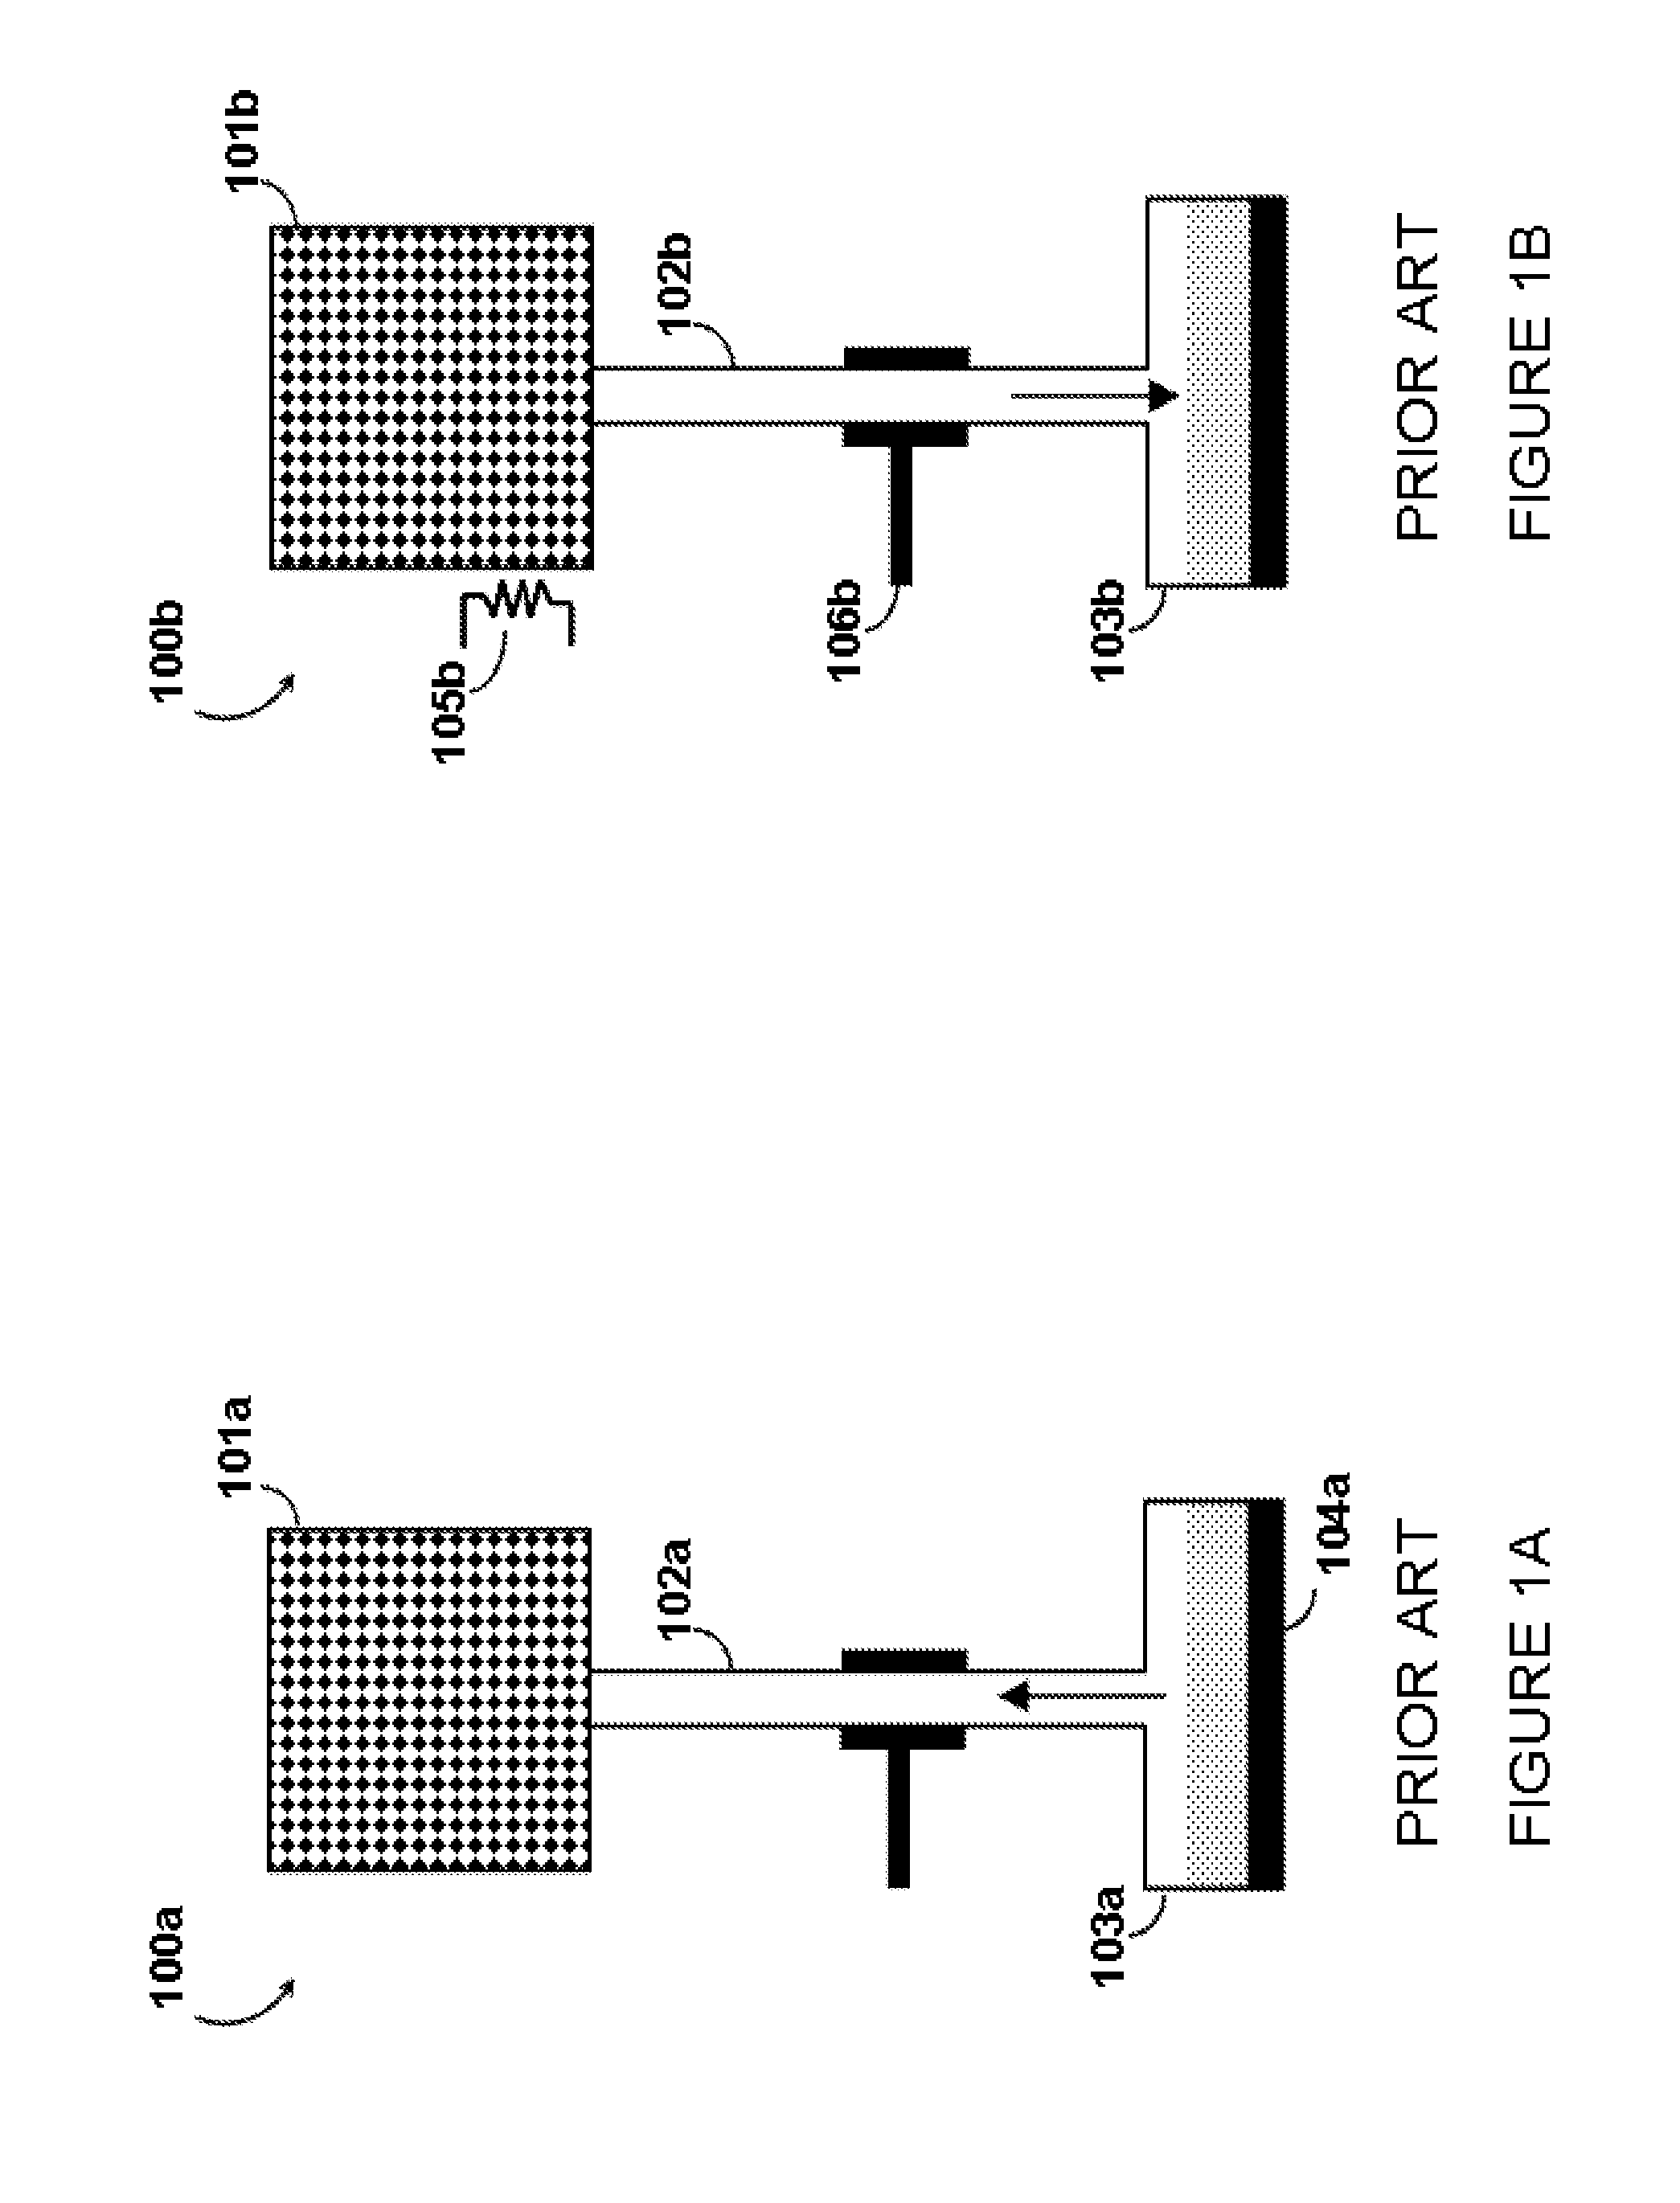 Systems, methods, and apparatus for cryogenic refrigeration